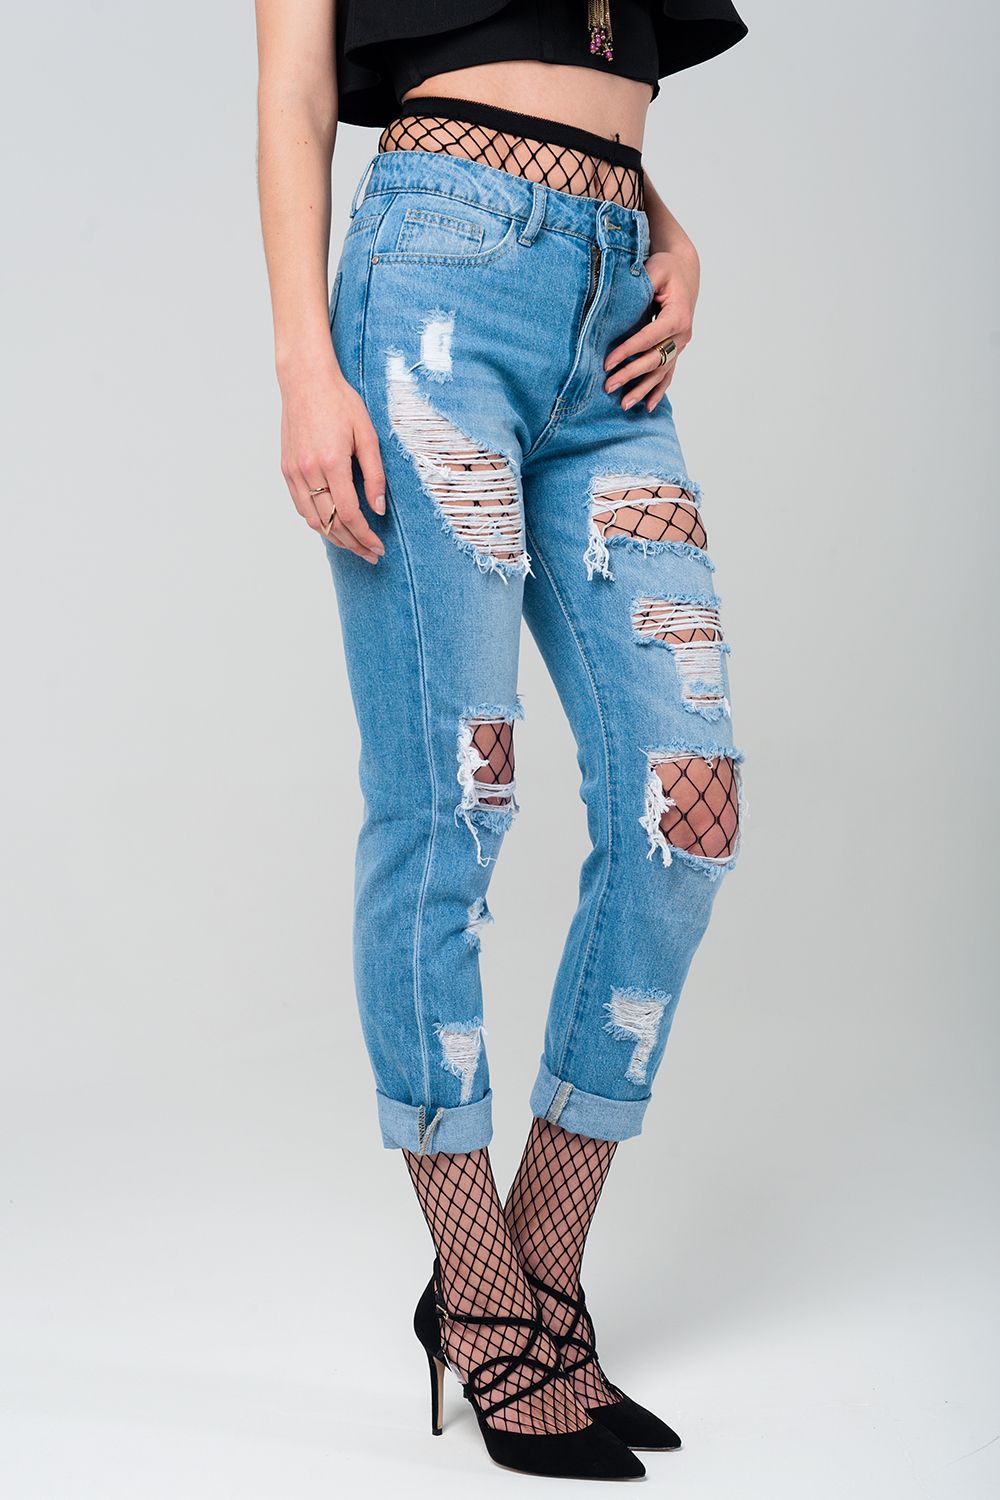 Ripped Mom Jeans With Fishnet Tights